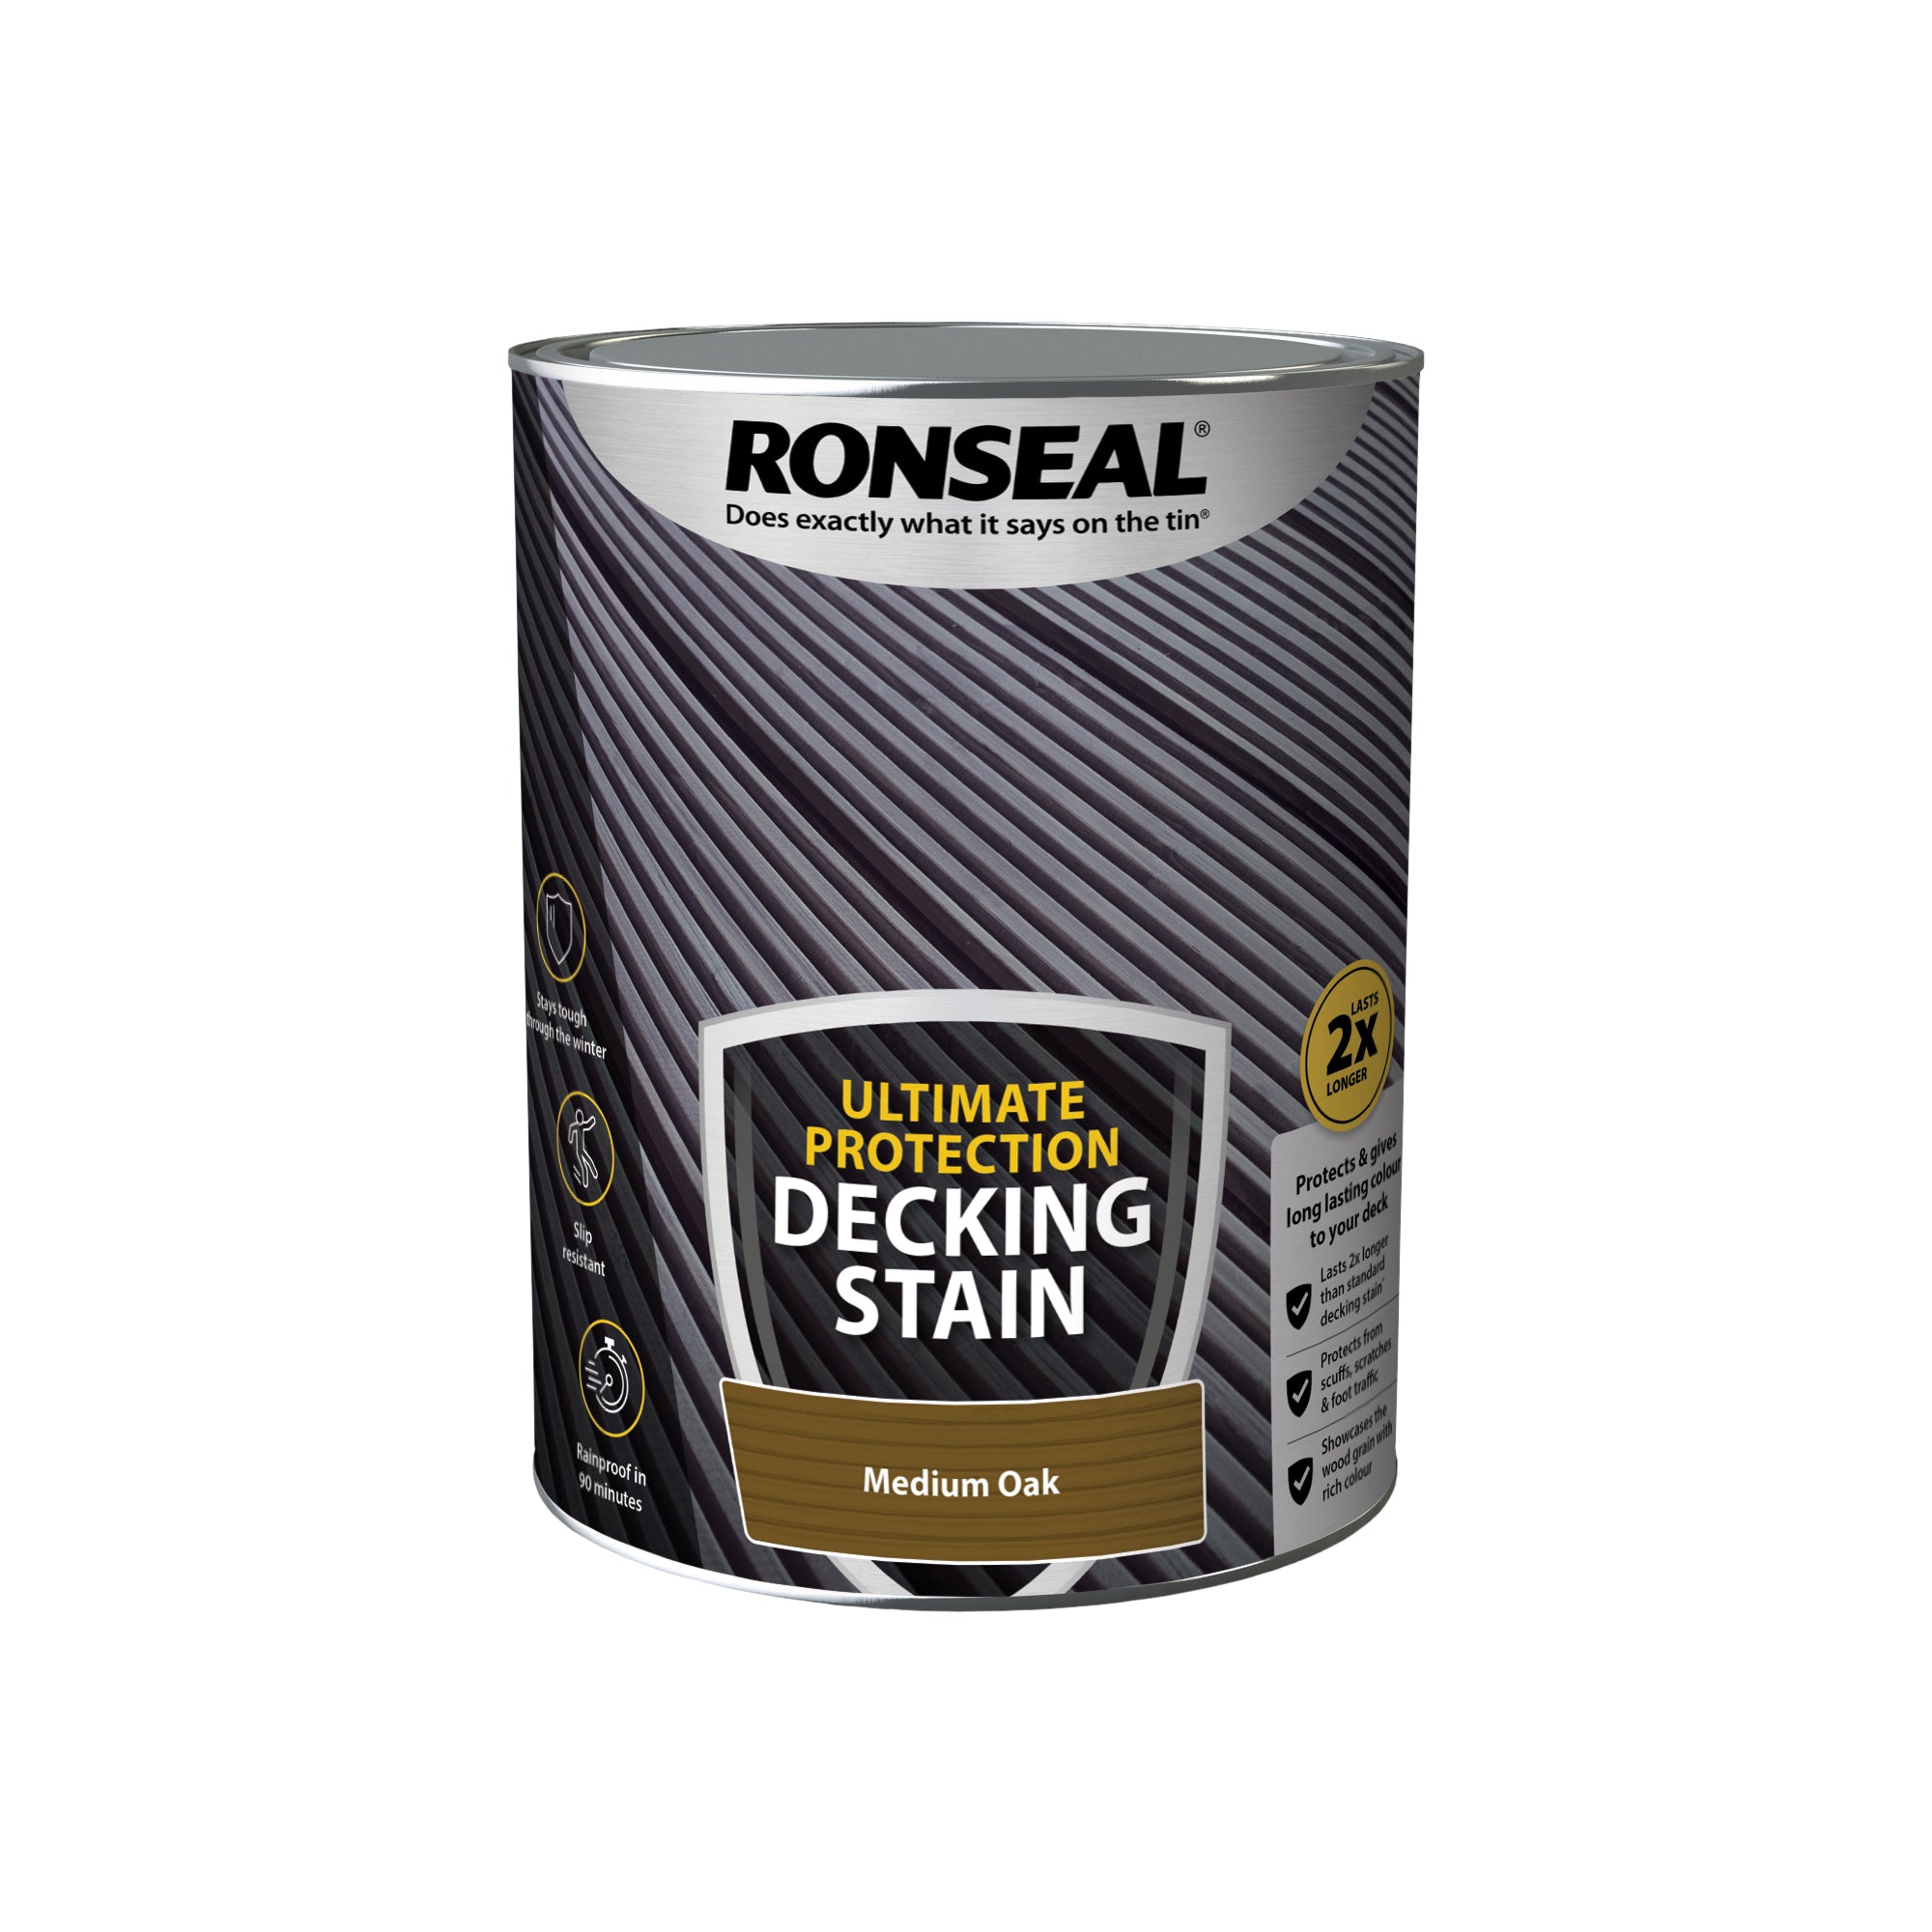 Ronseal-Ultimate-Protection-Decking-Stain-Medium-Oak-5L